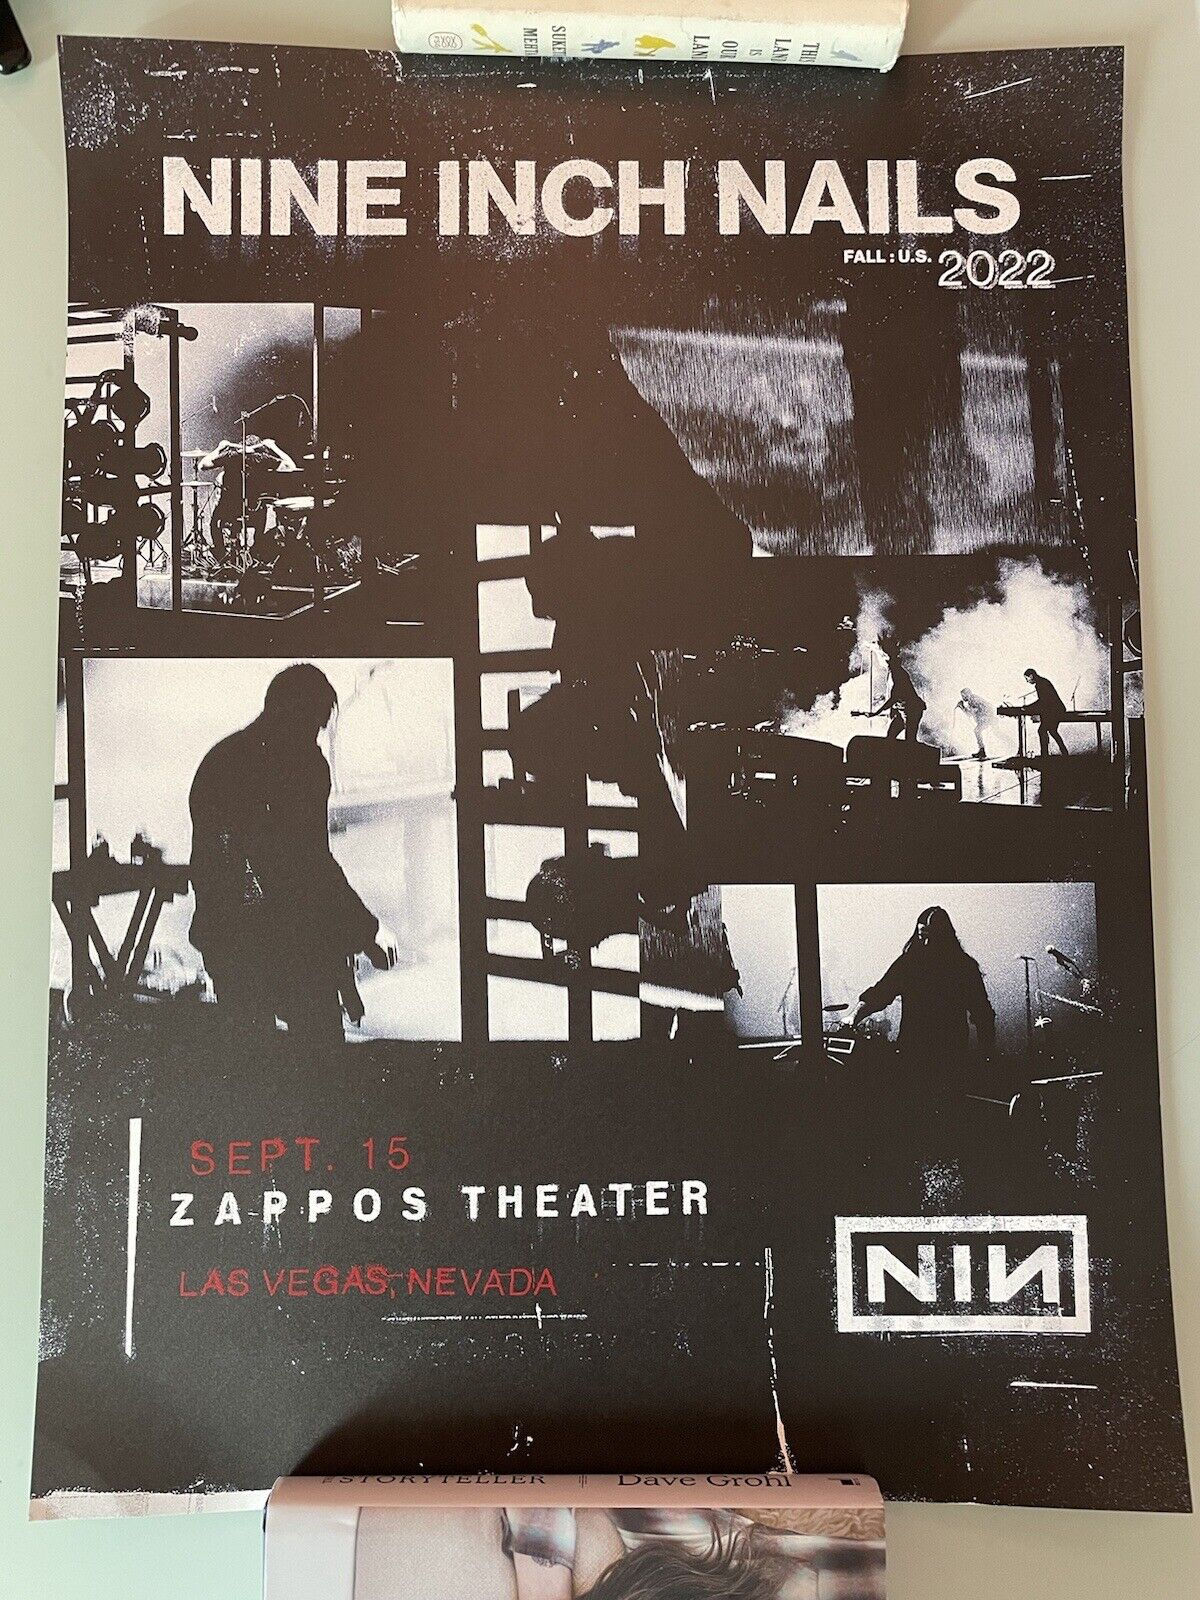 <a href='https://www.ebay.com/sch/i.html?_from=R40&_trksid=p2323012.m570.l1313&_nkw=Nine+Inch+Nails+Poster+Las Vegas&_sacat=0&mkcid=1&mkrid=711-53200-19255-0&siteid=0&campid=5336302525&customid=poster&toolid=10001&mkevt=1'>Buy this Poster!</a>